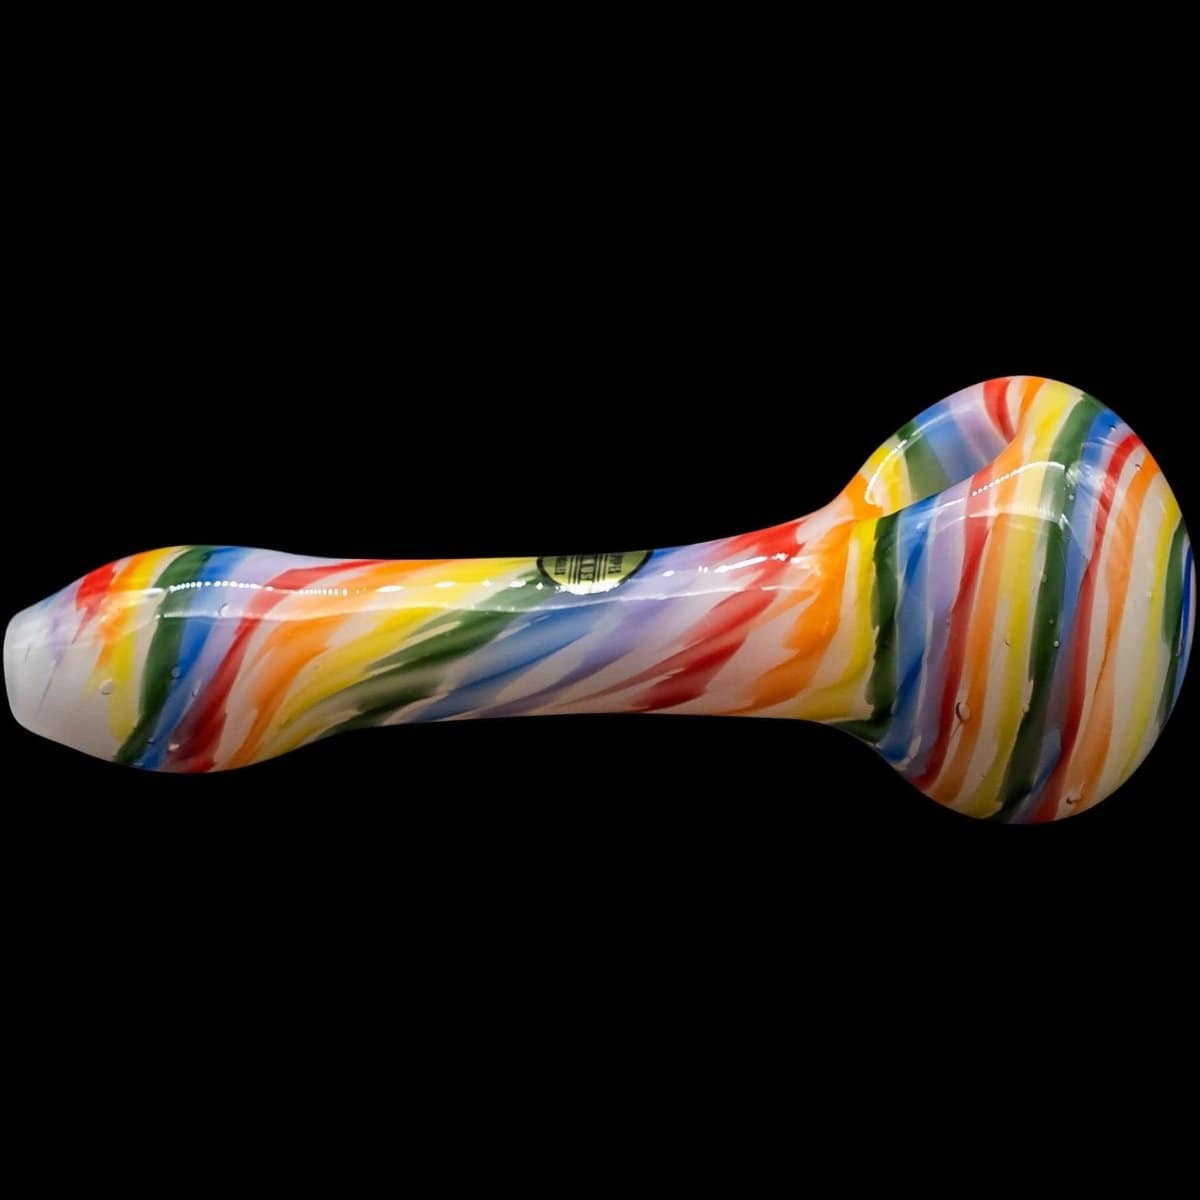 LA Pipes Hand Pipe "Rainbow Tie-Dye" Glass Spoon Pipe on White